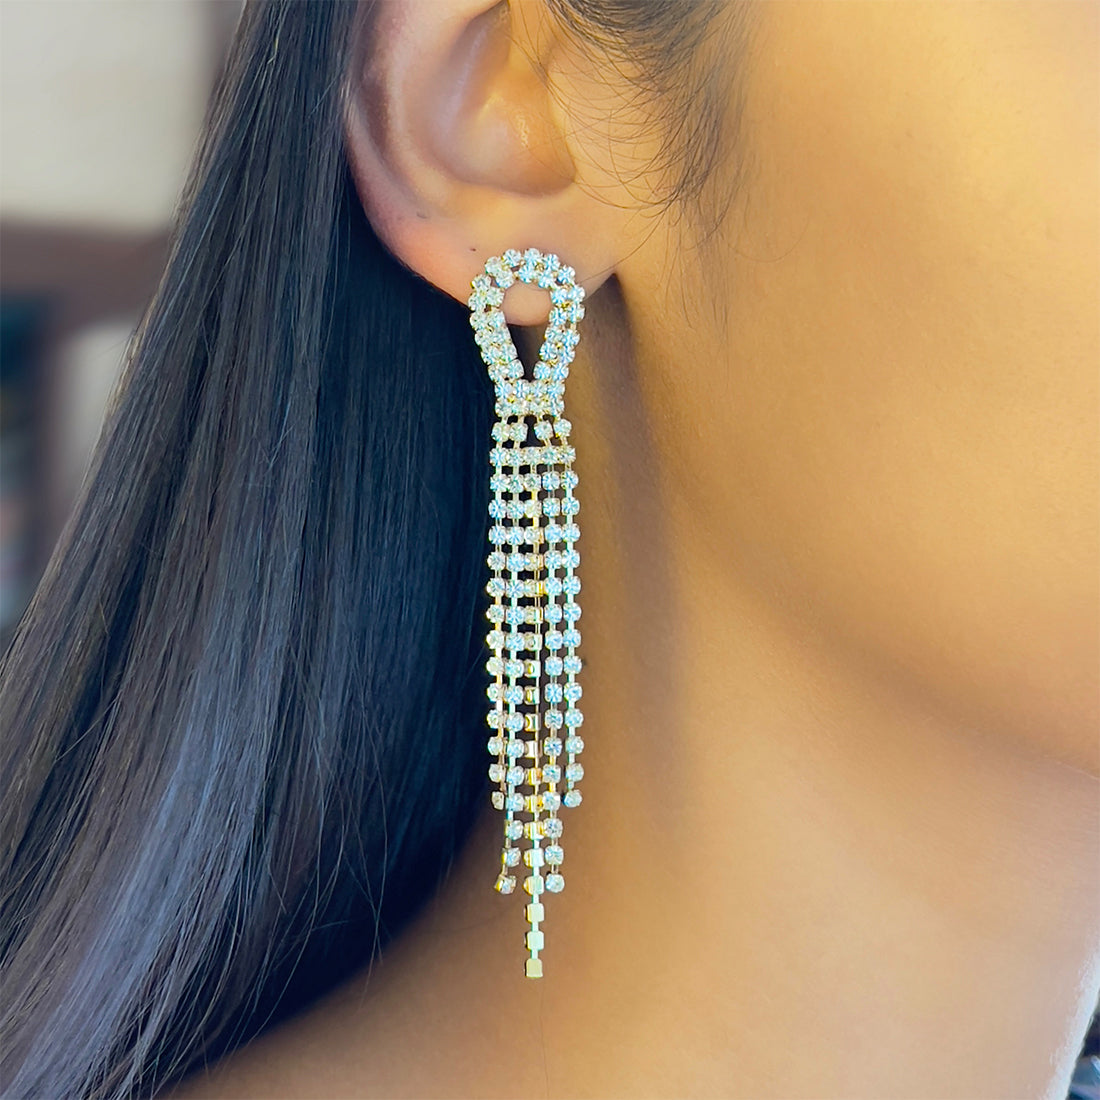 Contemporary White Diamante Crystal Studded Gold-Toned Long Tassel Drop Earrings